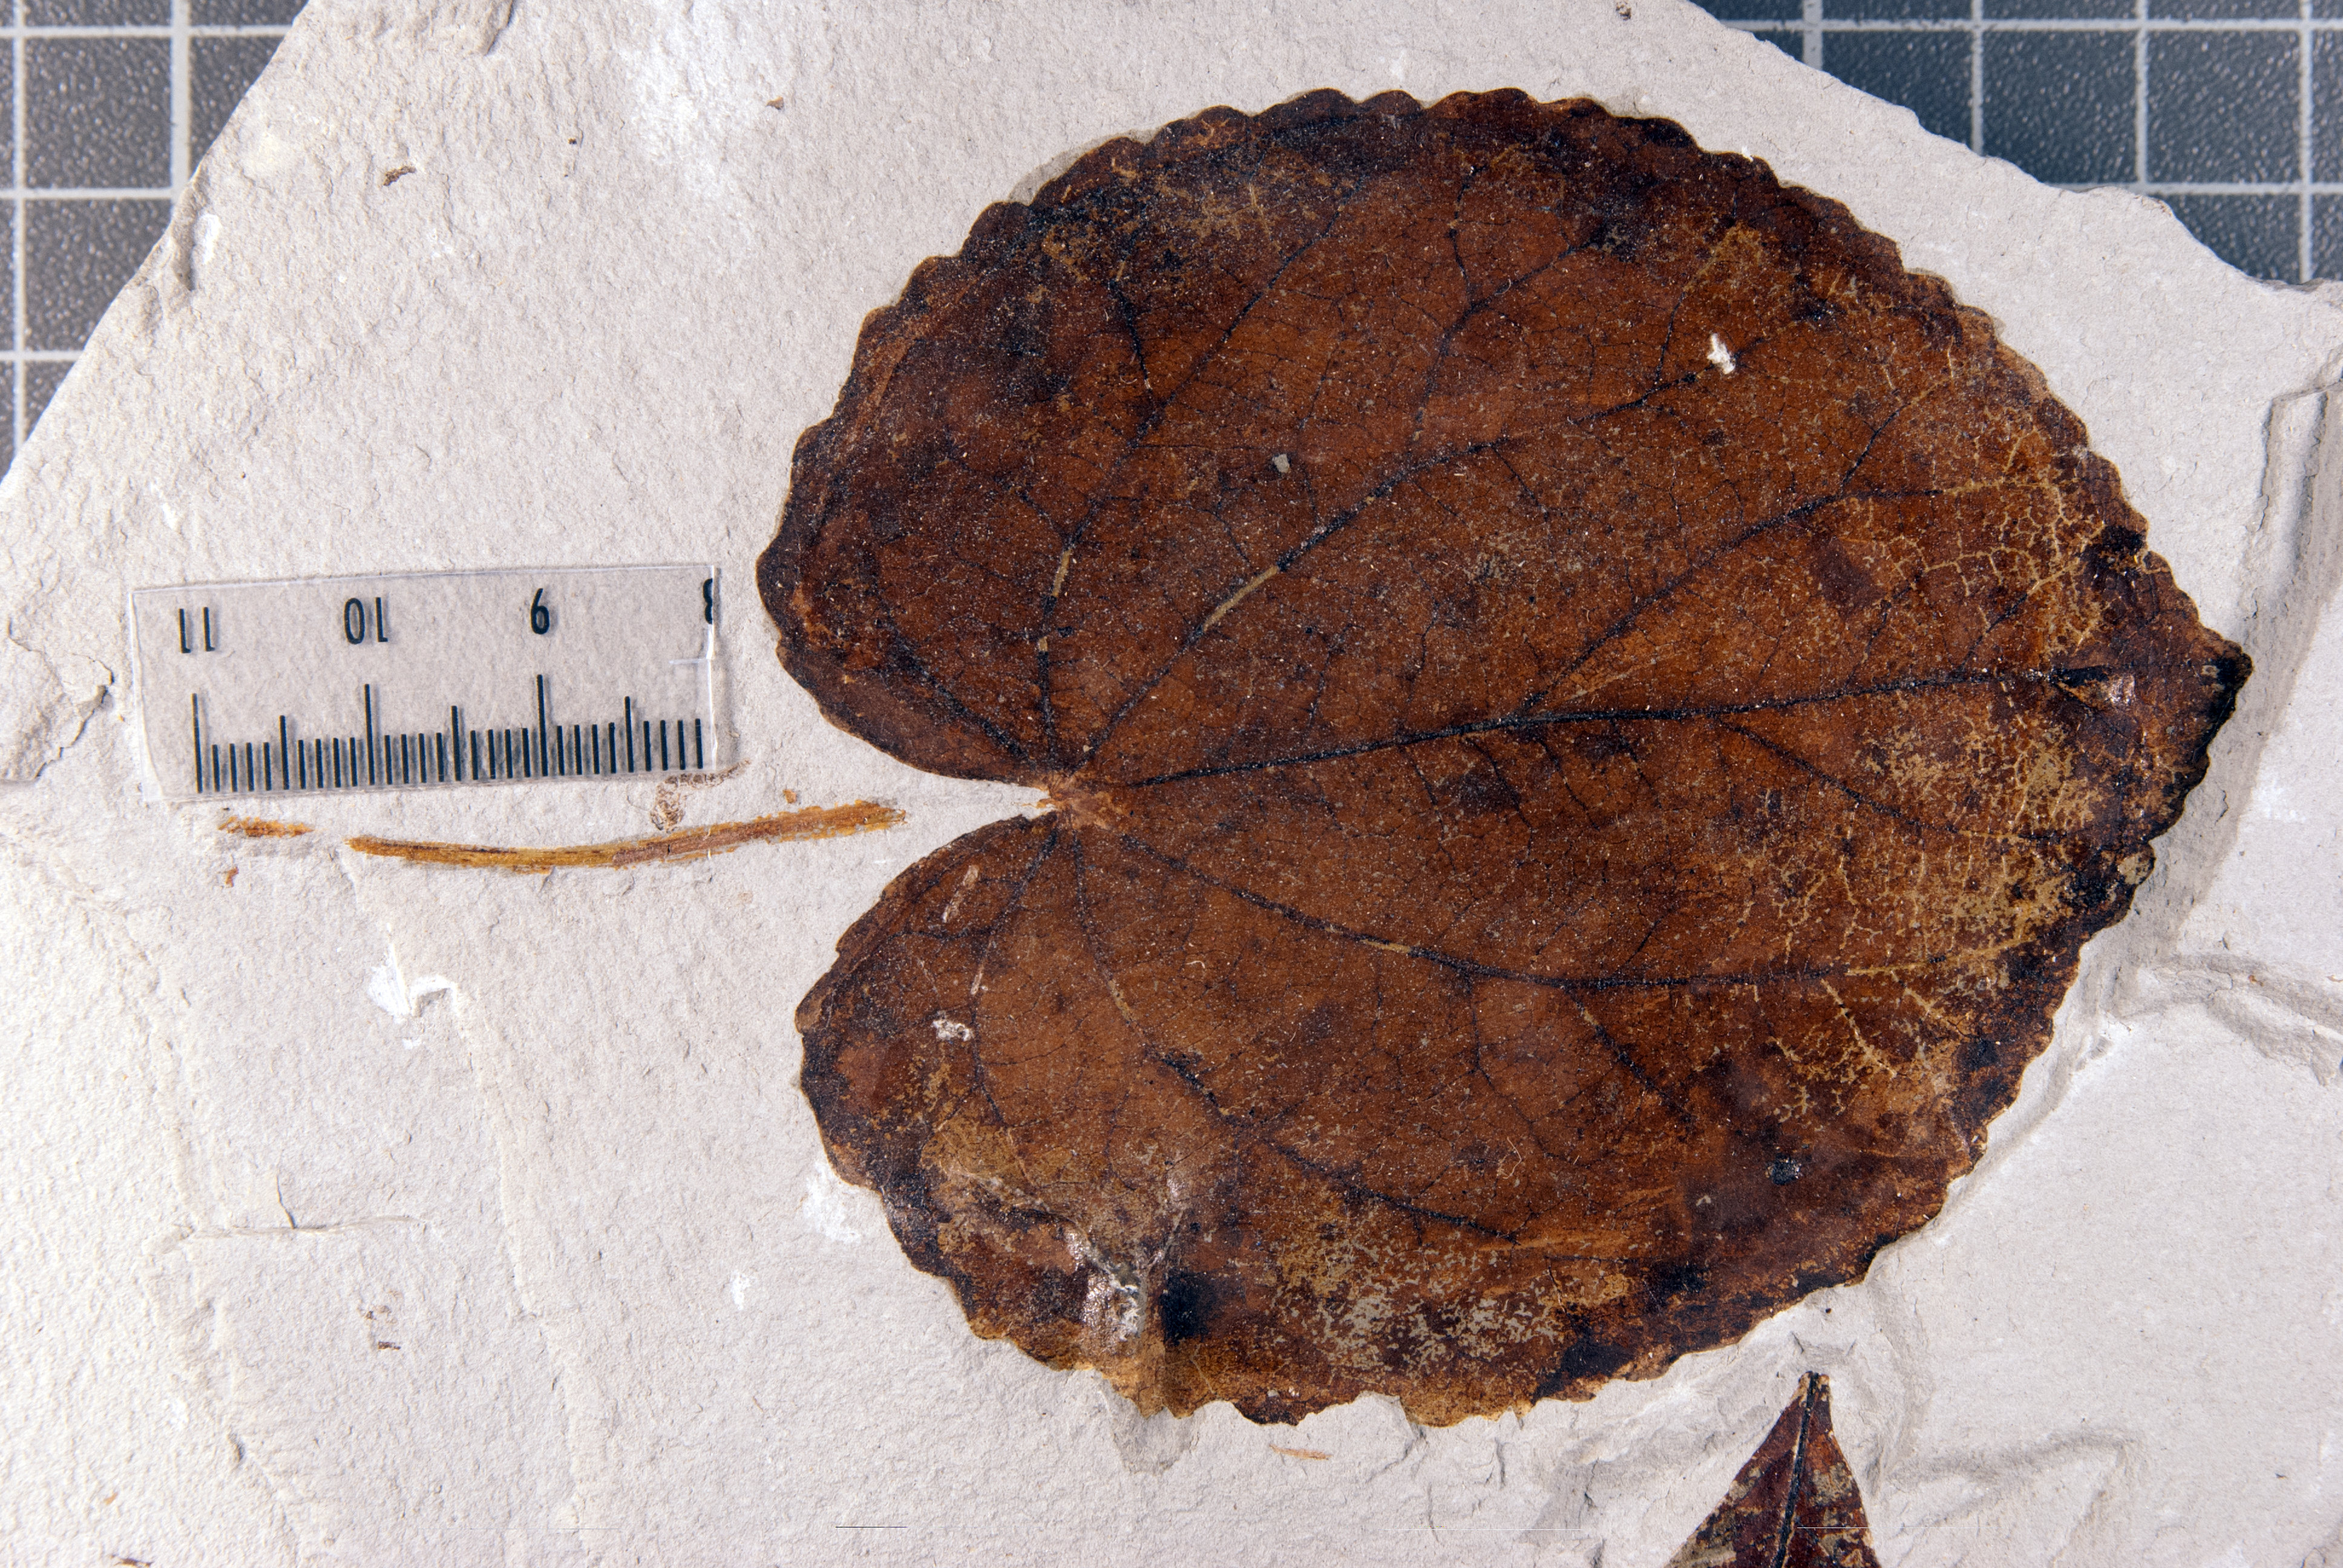 Leaf from a Pliocene tree of the genus Cercidiphyllum (C. crenatum) from the fossil site Willershausen (Germany’s Harz region)